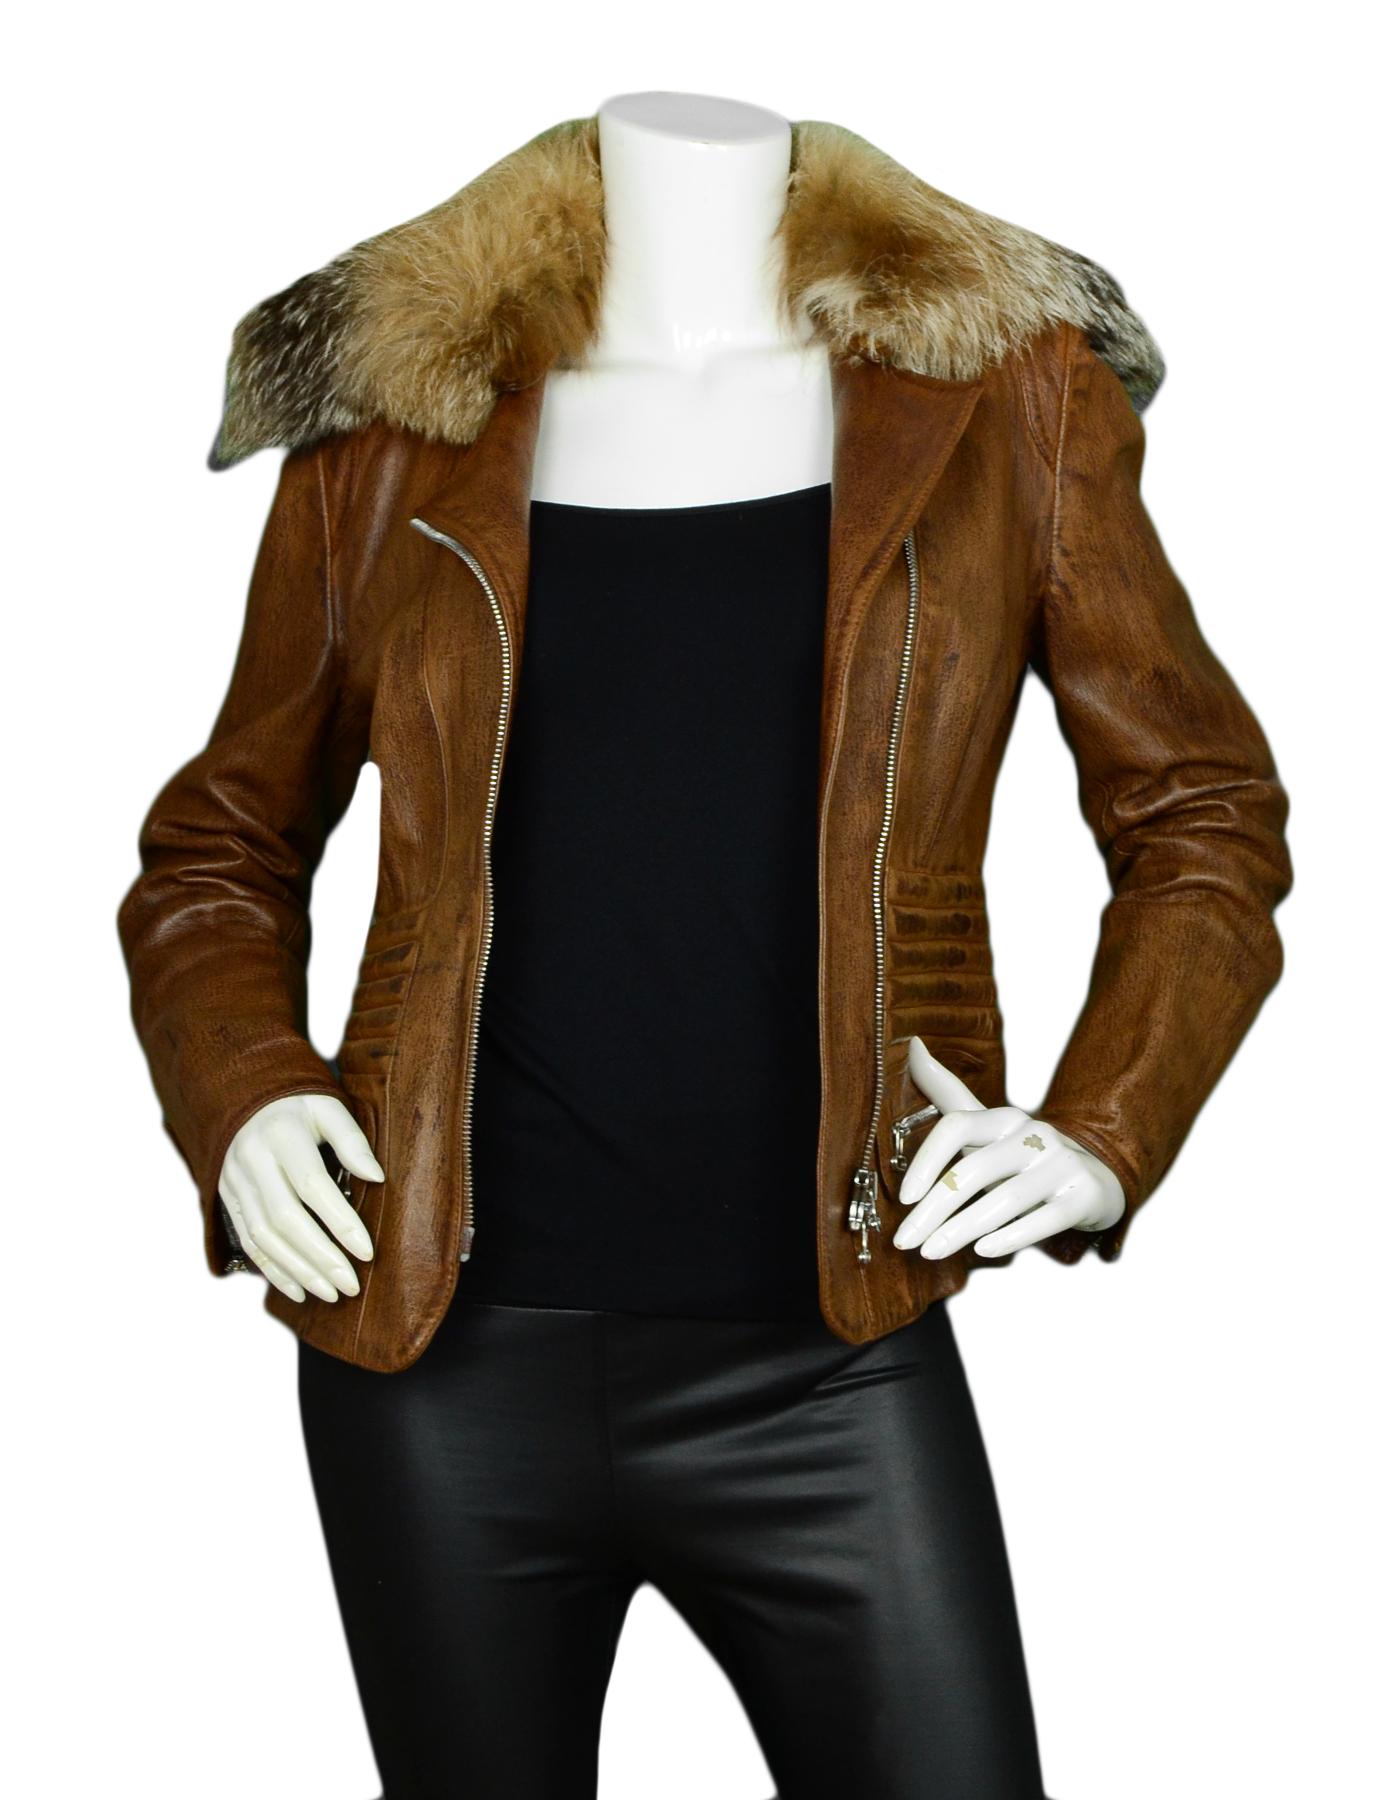 Gianfranco Ferre Brown Distressed Leather Jacket w/ Fur Collar sz 40

Made In: Italy 
Color: Brown
Materials: 100% Sheep Leather
Lining: 51% Acetate, 49% Viscose
Opening/Closure: Front zip
Overall Condition: Excellent pre-owned condition

Tag Size: